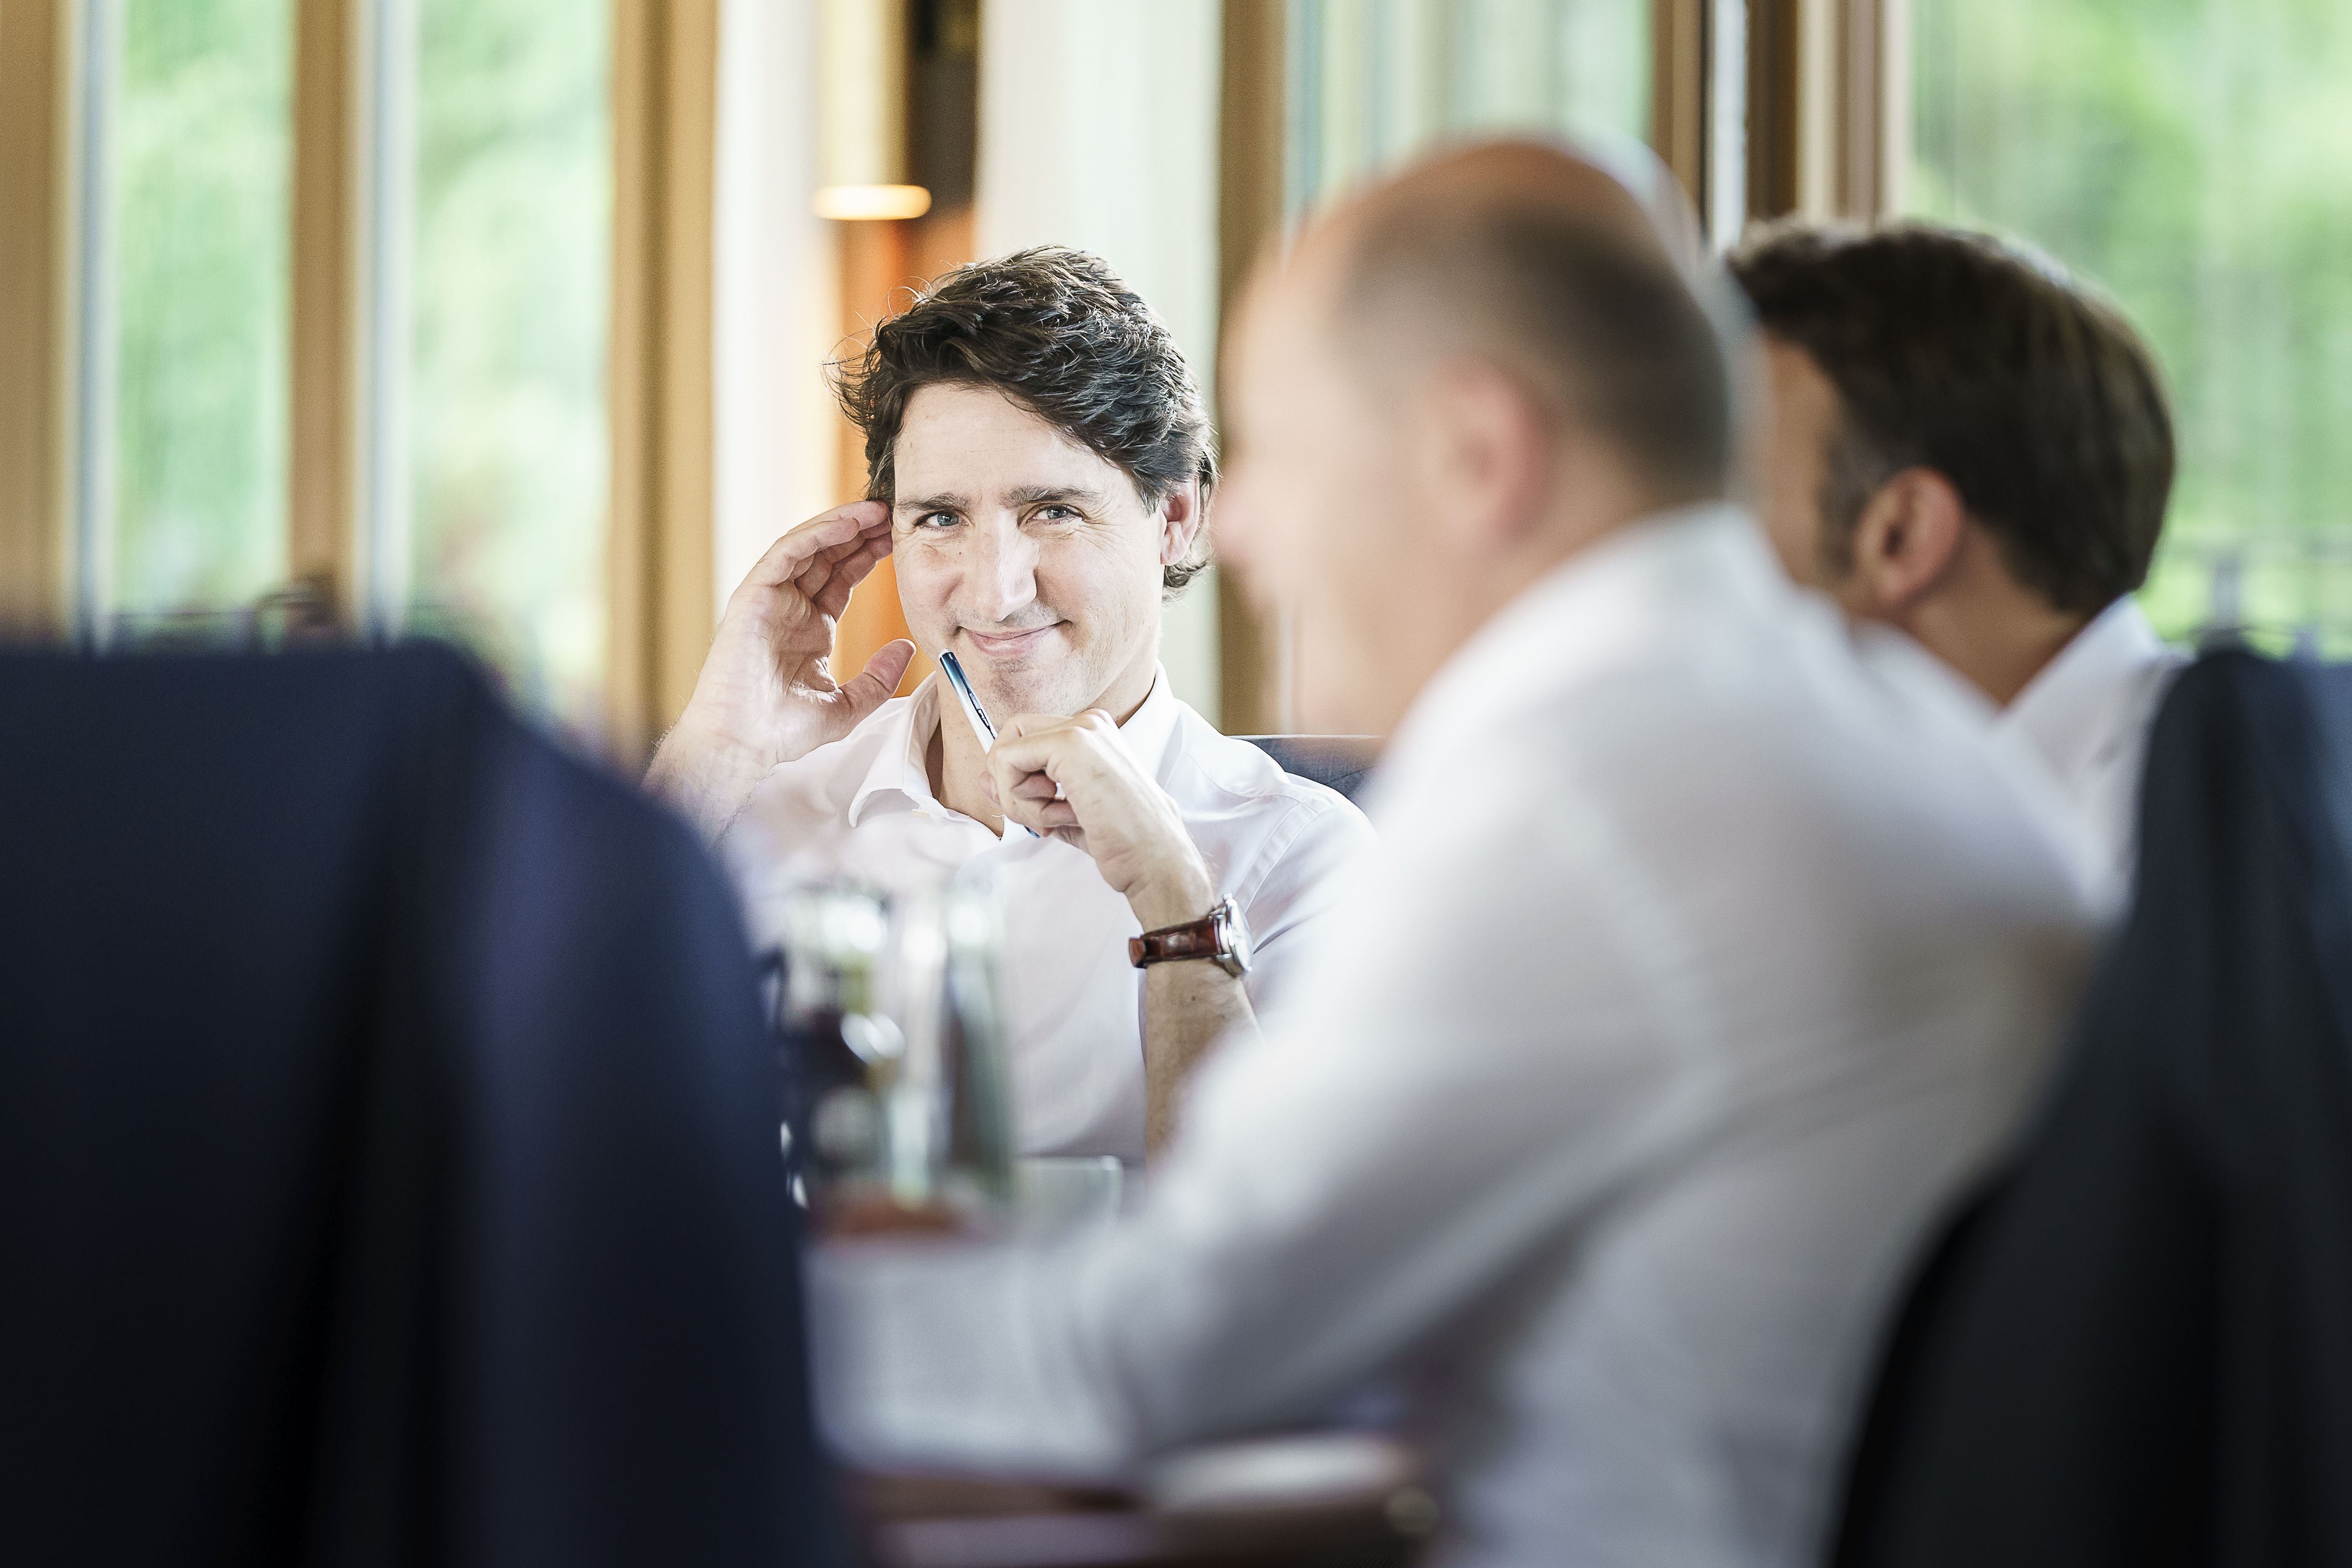 Canadian Prime Minister Justin Trudeau at the start of the second working session.